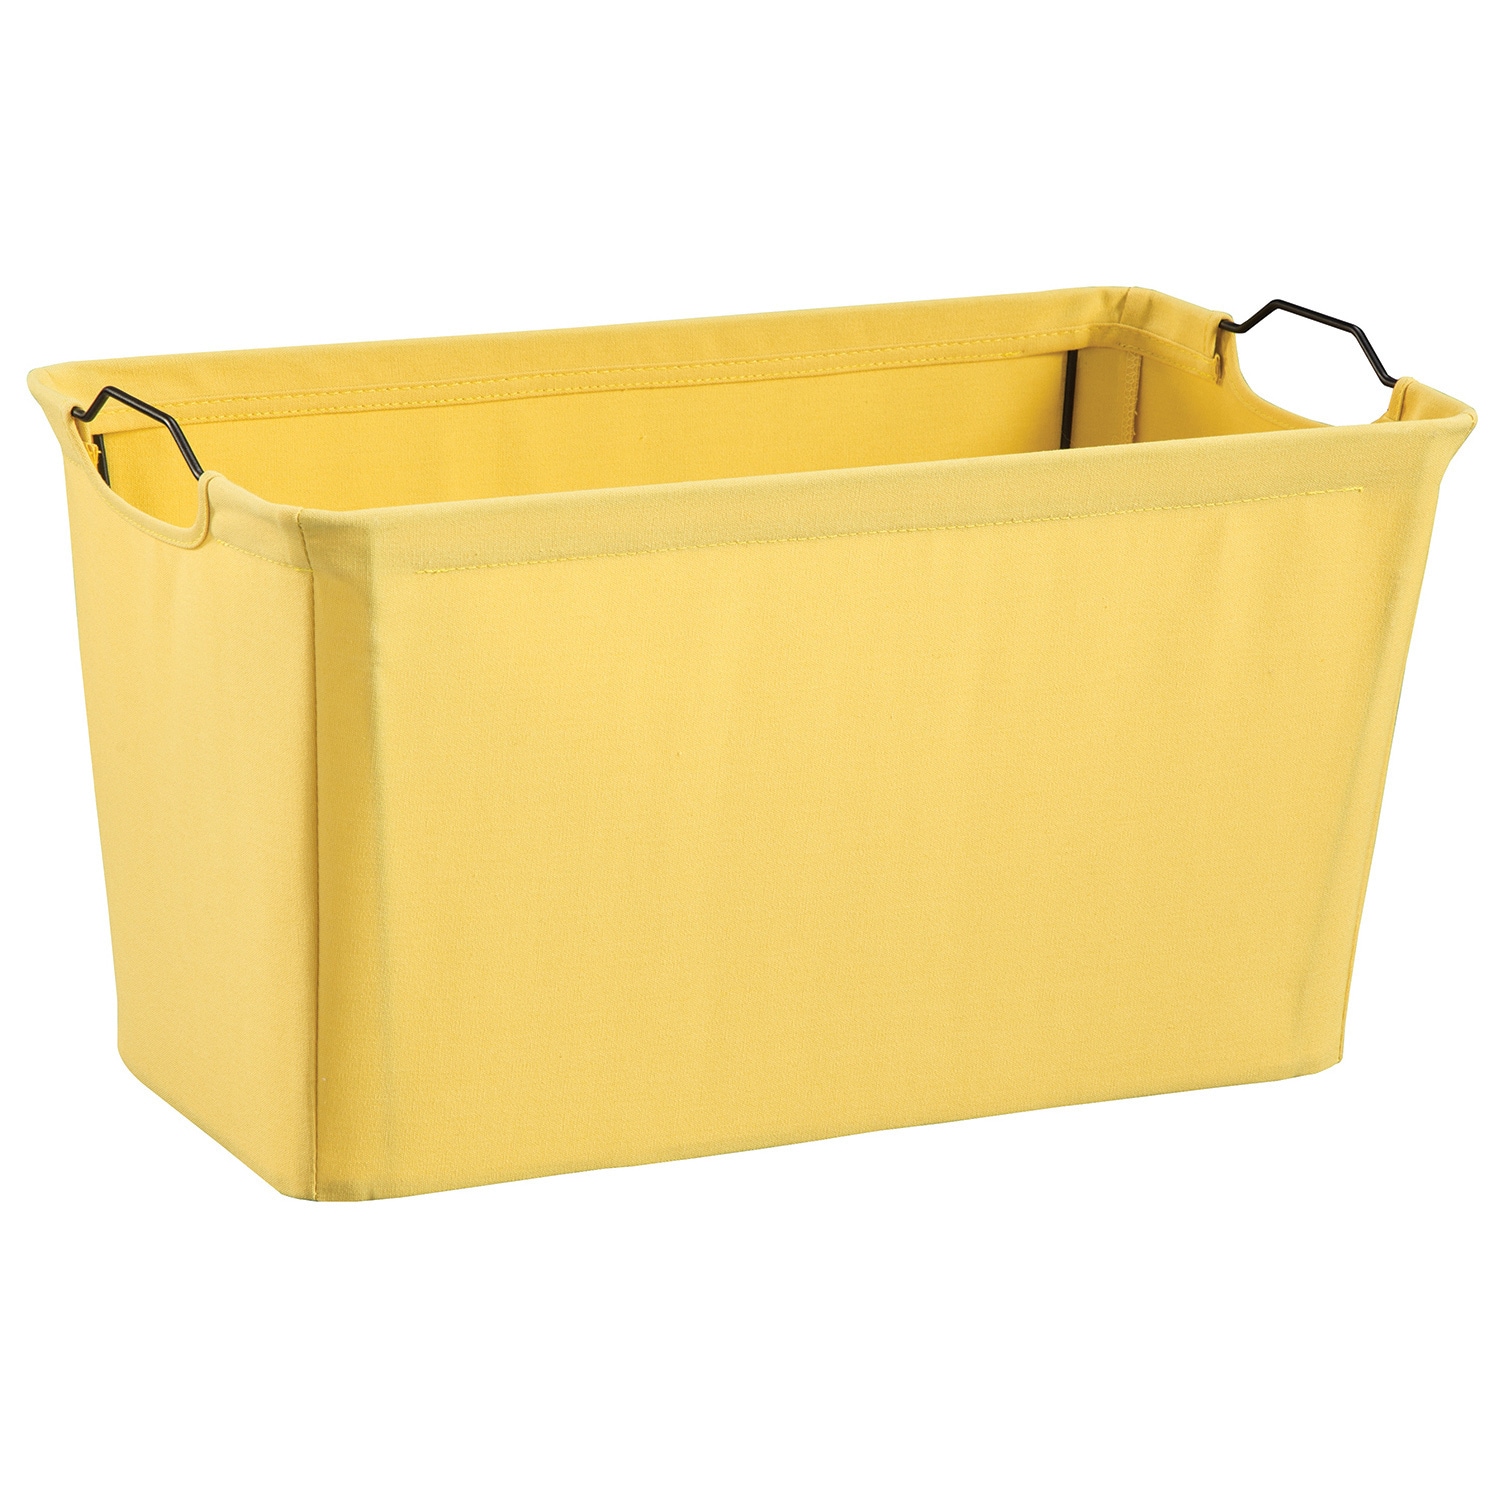 https://ak1.ostkcdn.com/images/products/15103224/ClosetMaid-Wire-Frame-Wide-Fabric-Bin-785be87d-c141-4859-a478-67f638ca620f.jpg